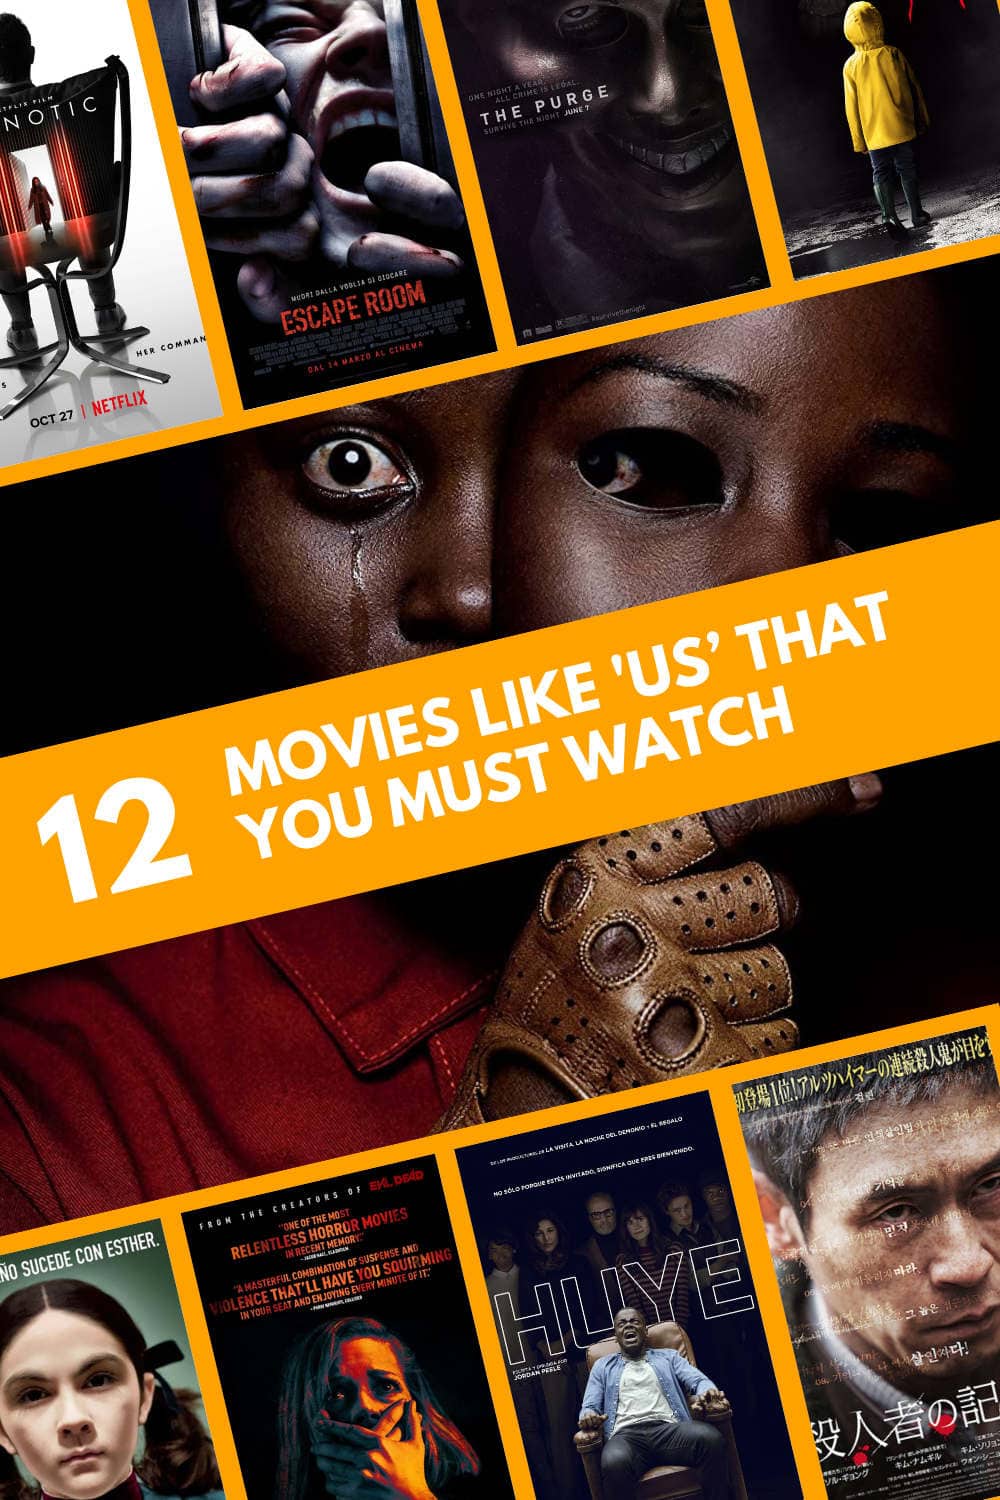 Movie Like 'Us’ that You Must Watch